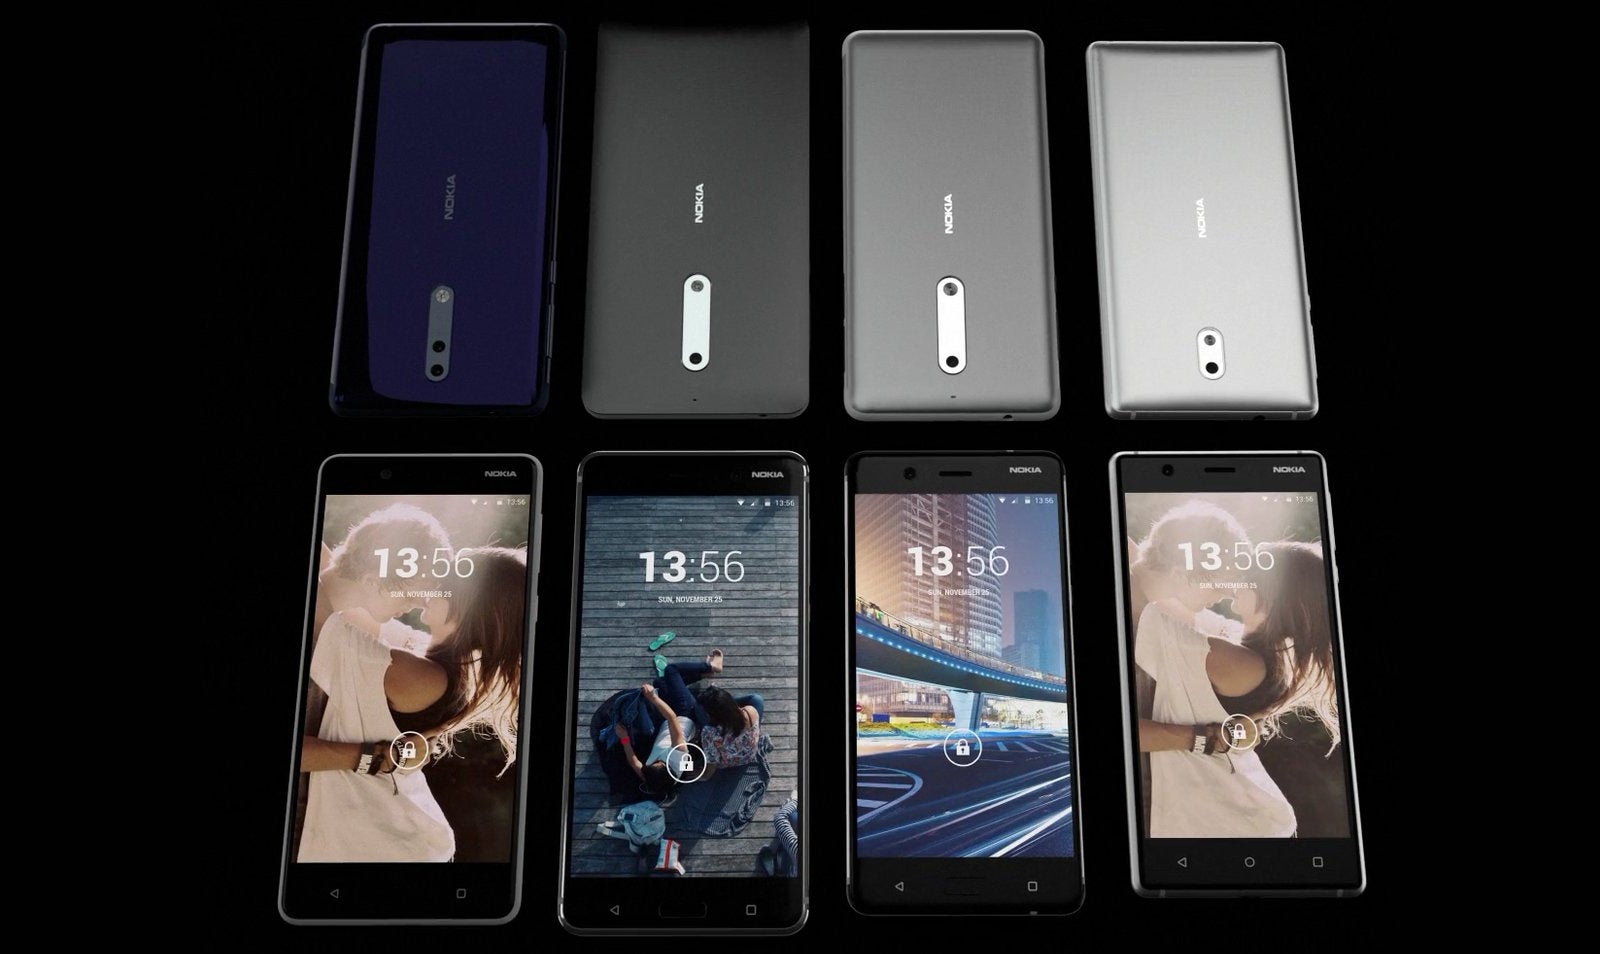 The new family of Nokia smartphones &ndash; Nokia 8, 6, 5 and 3. - The Nokia 8 announcement is today. Here are the specs, features and images we have so far